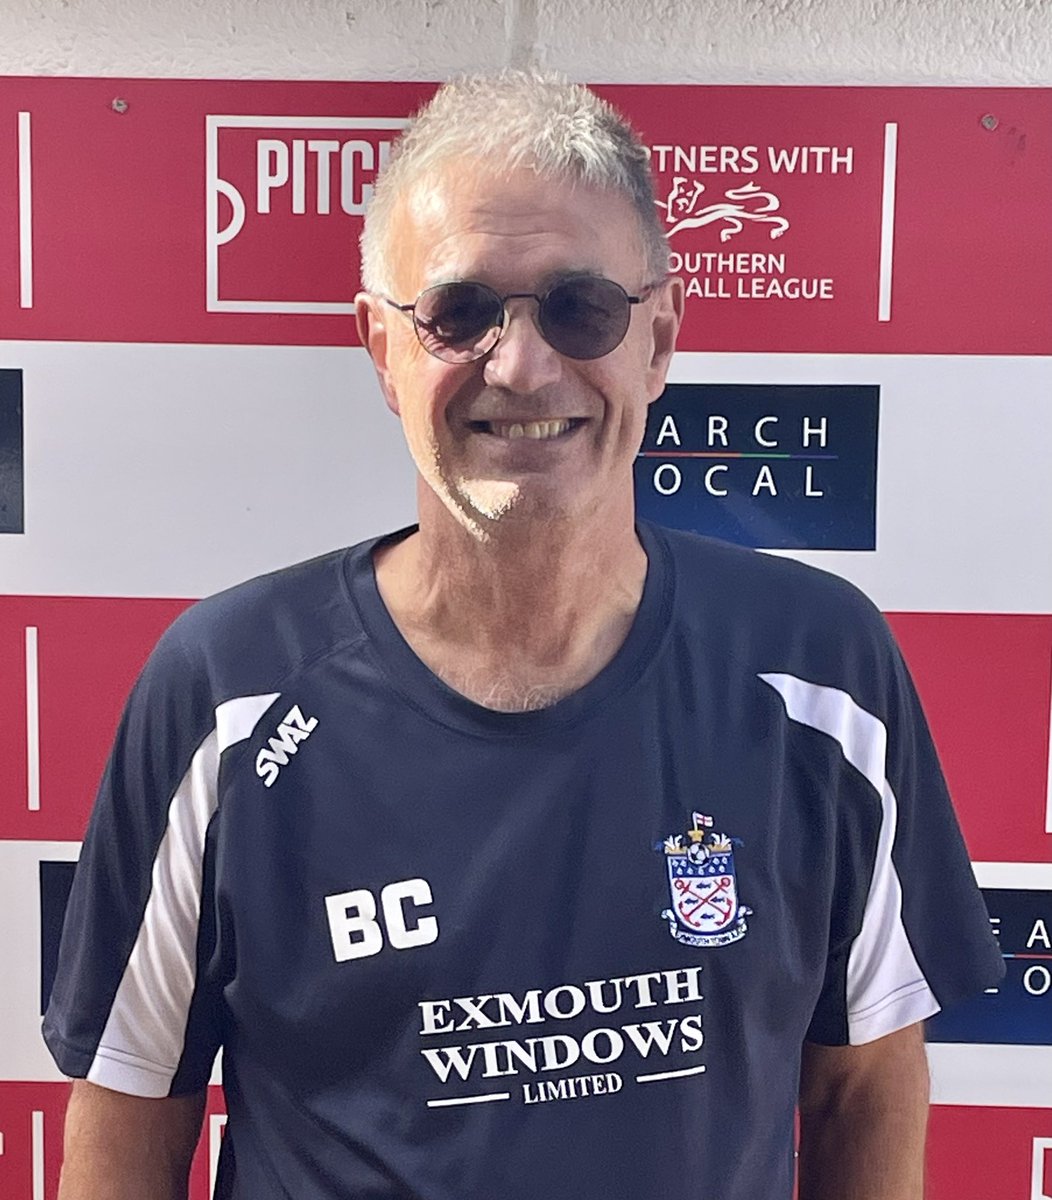 Wishing a Happy Birthday to our club physio Bob Chard from everyone at ETFC 💙